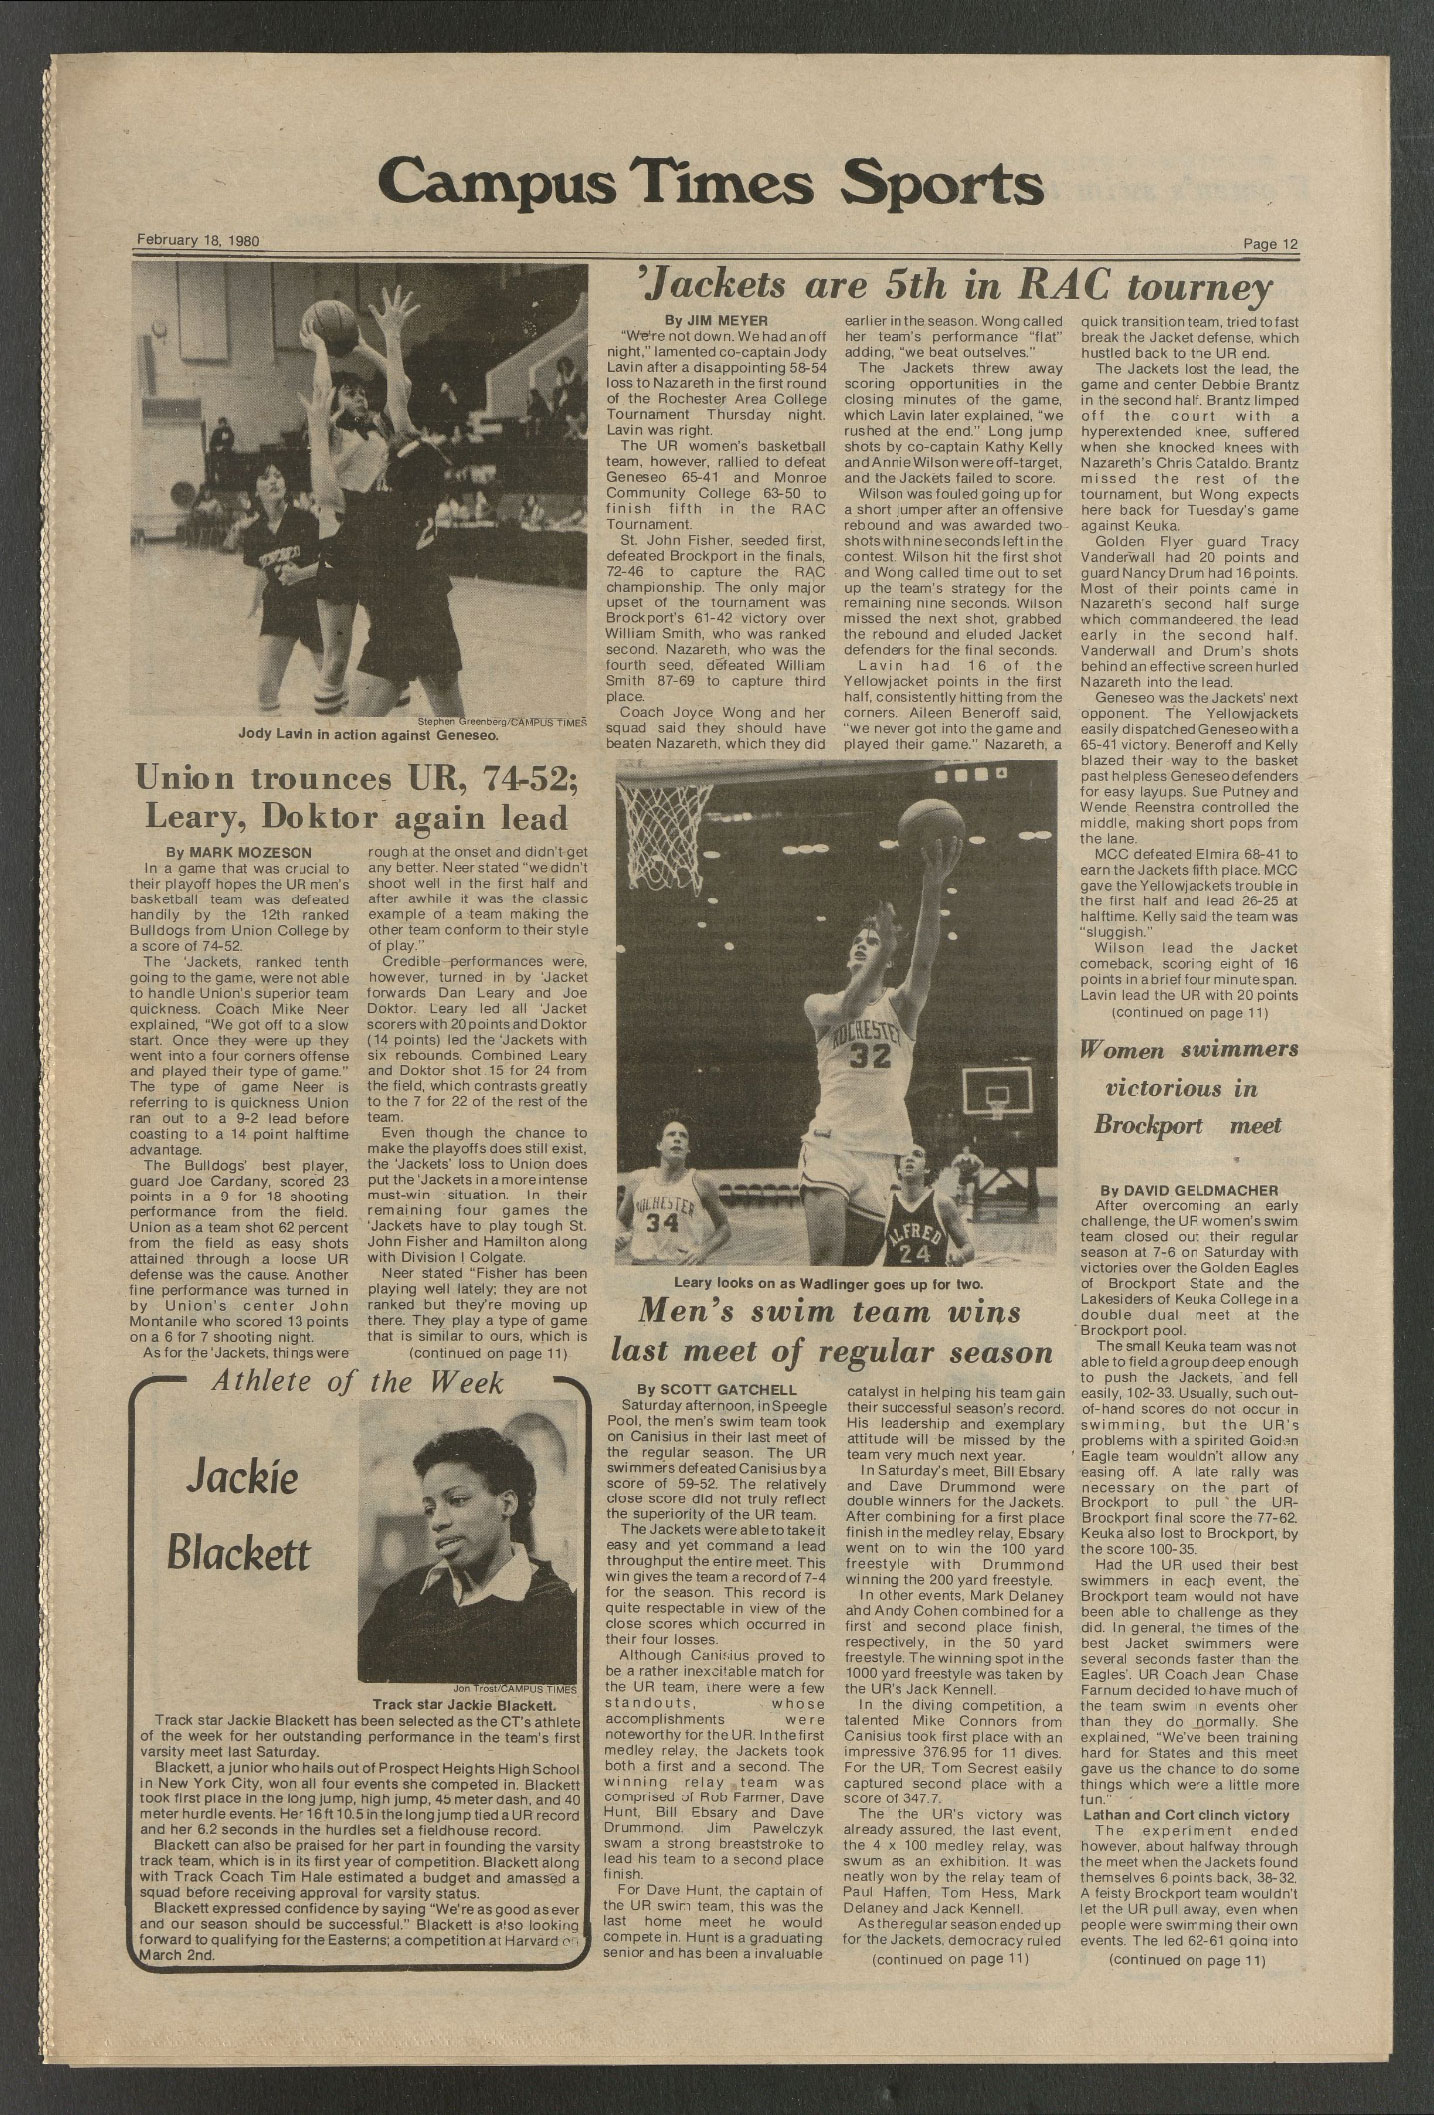 A scan of an article featuring Jackie Blackett ’81 from Campus Times on February 18, 1980.